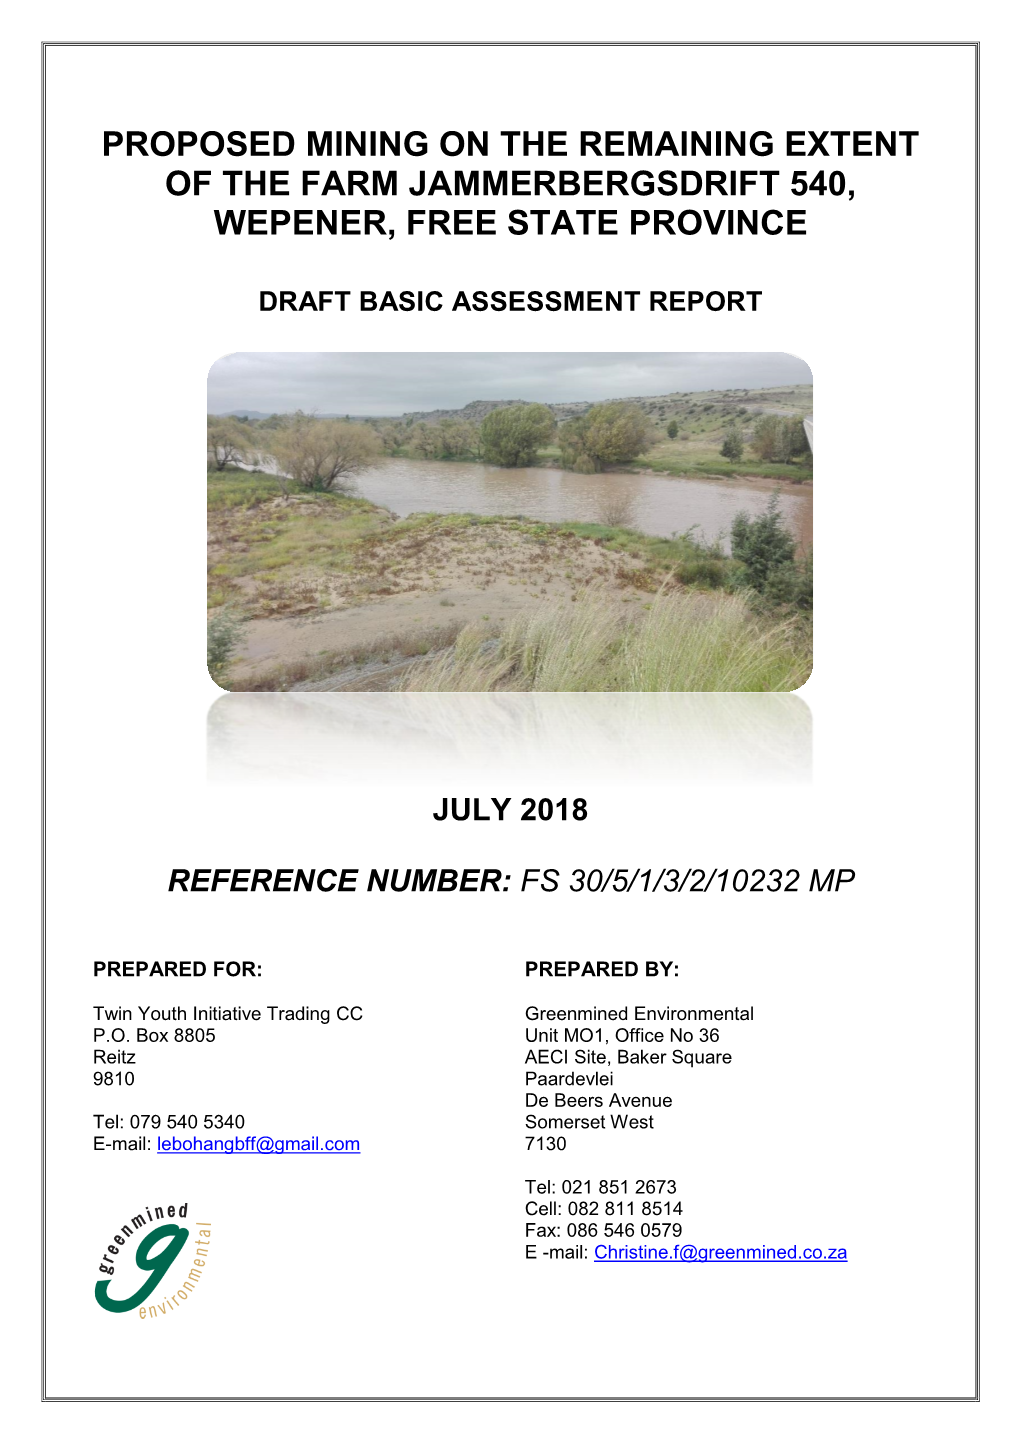 Proposed Mining on the Remaining Extent of the Farm Jammerbergsdrift 540, Wepener, Free State Province